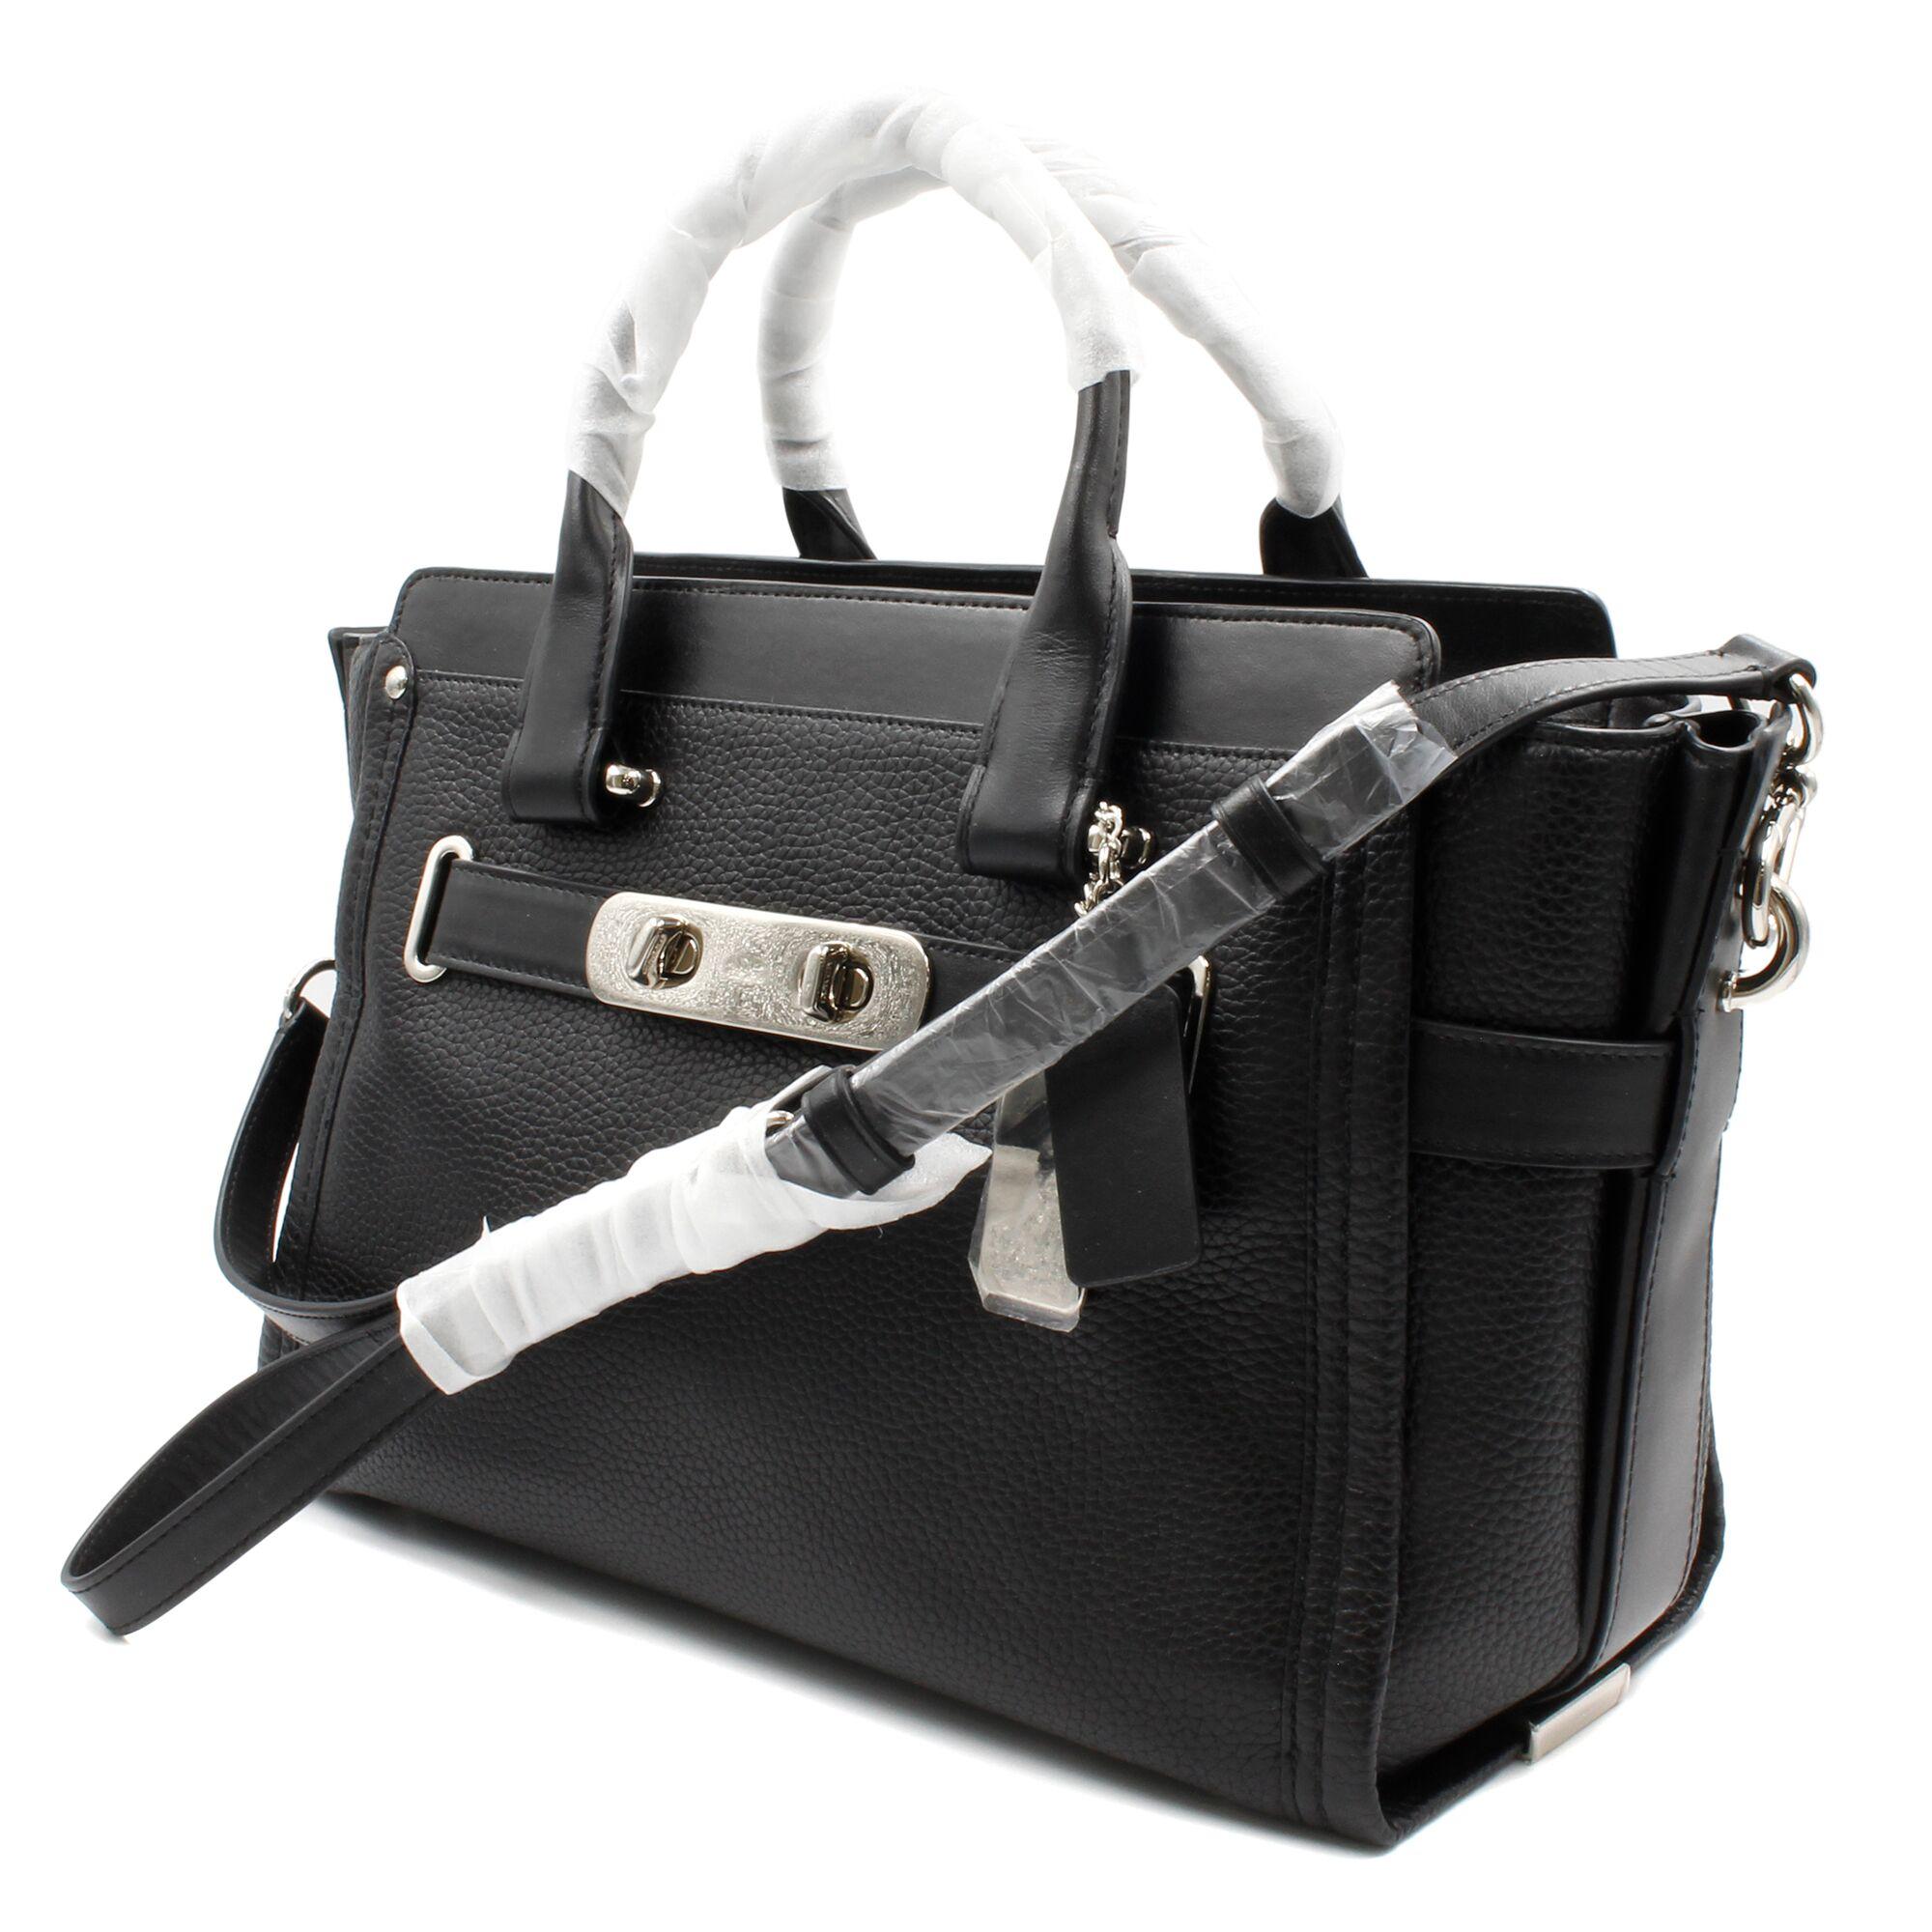 Coach Pebble Leather Swagger Bag Satchel Black Silver Hardware Medium Ladies Handbag.
Pebble leather
Inside zip, cell phone and multi-function pockets
Zip-top closure, fabric lining
Handles with 4 1/2